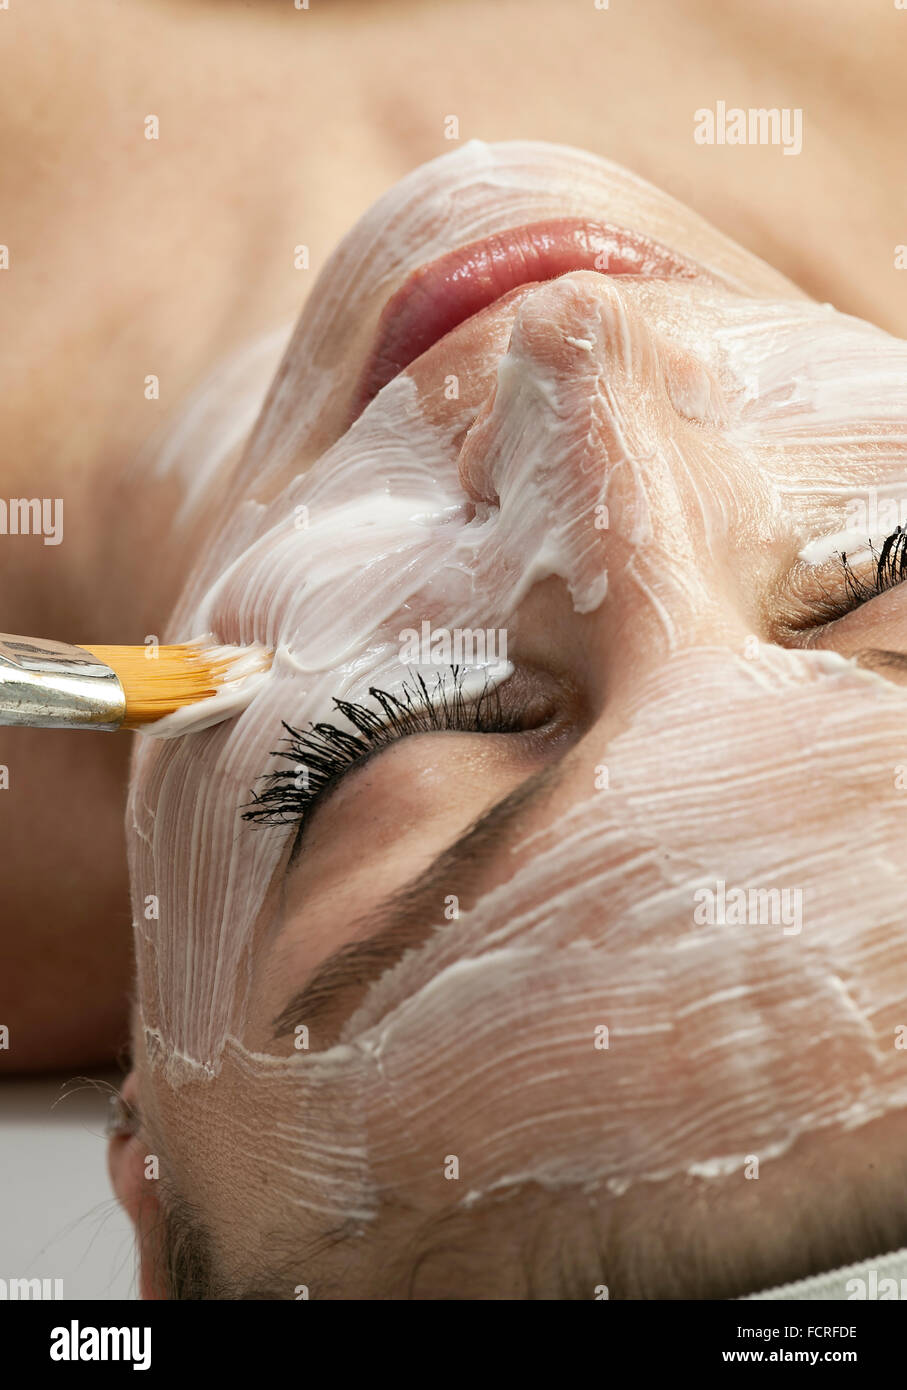 Woman getting a facial treatment at a spa. Stock Photo